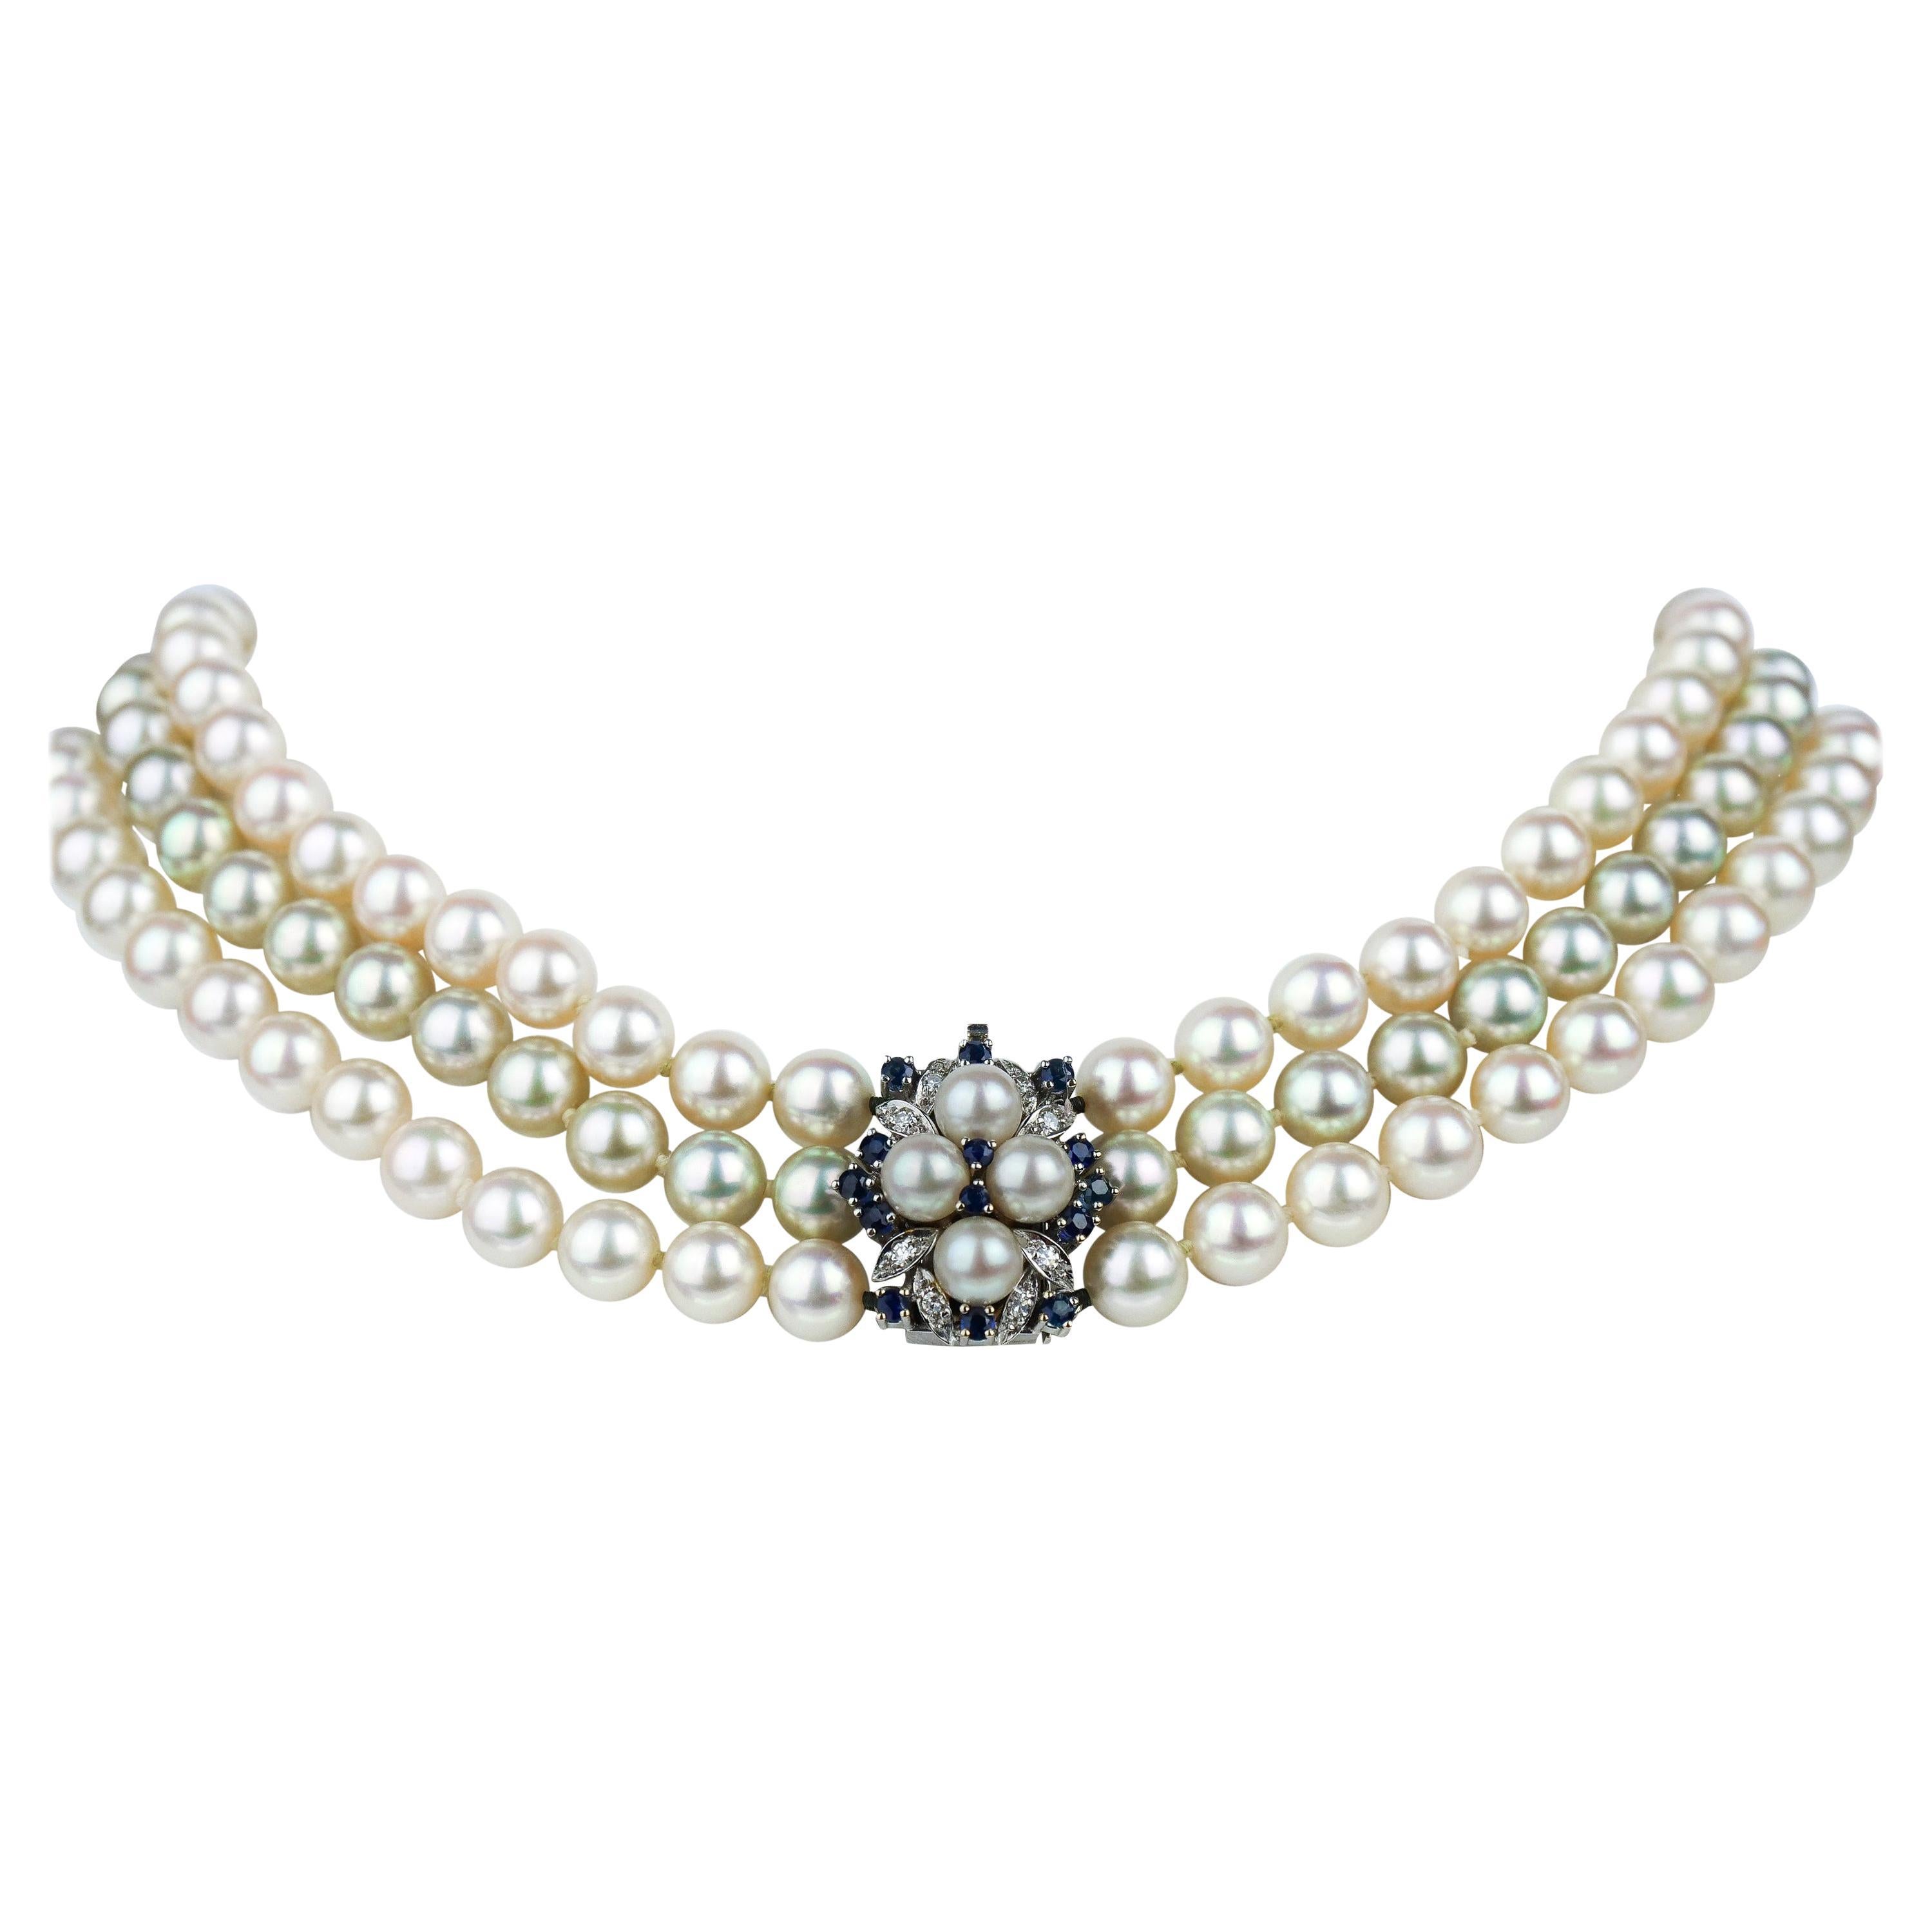 Bespoke Three-Row Akoya Pearl Necklace with Diamond and Sapphire Clasp For Sale